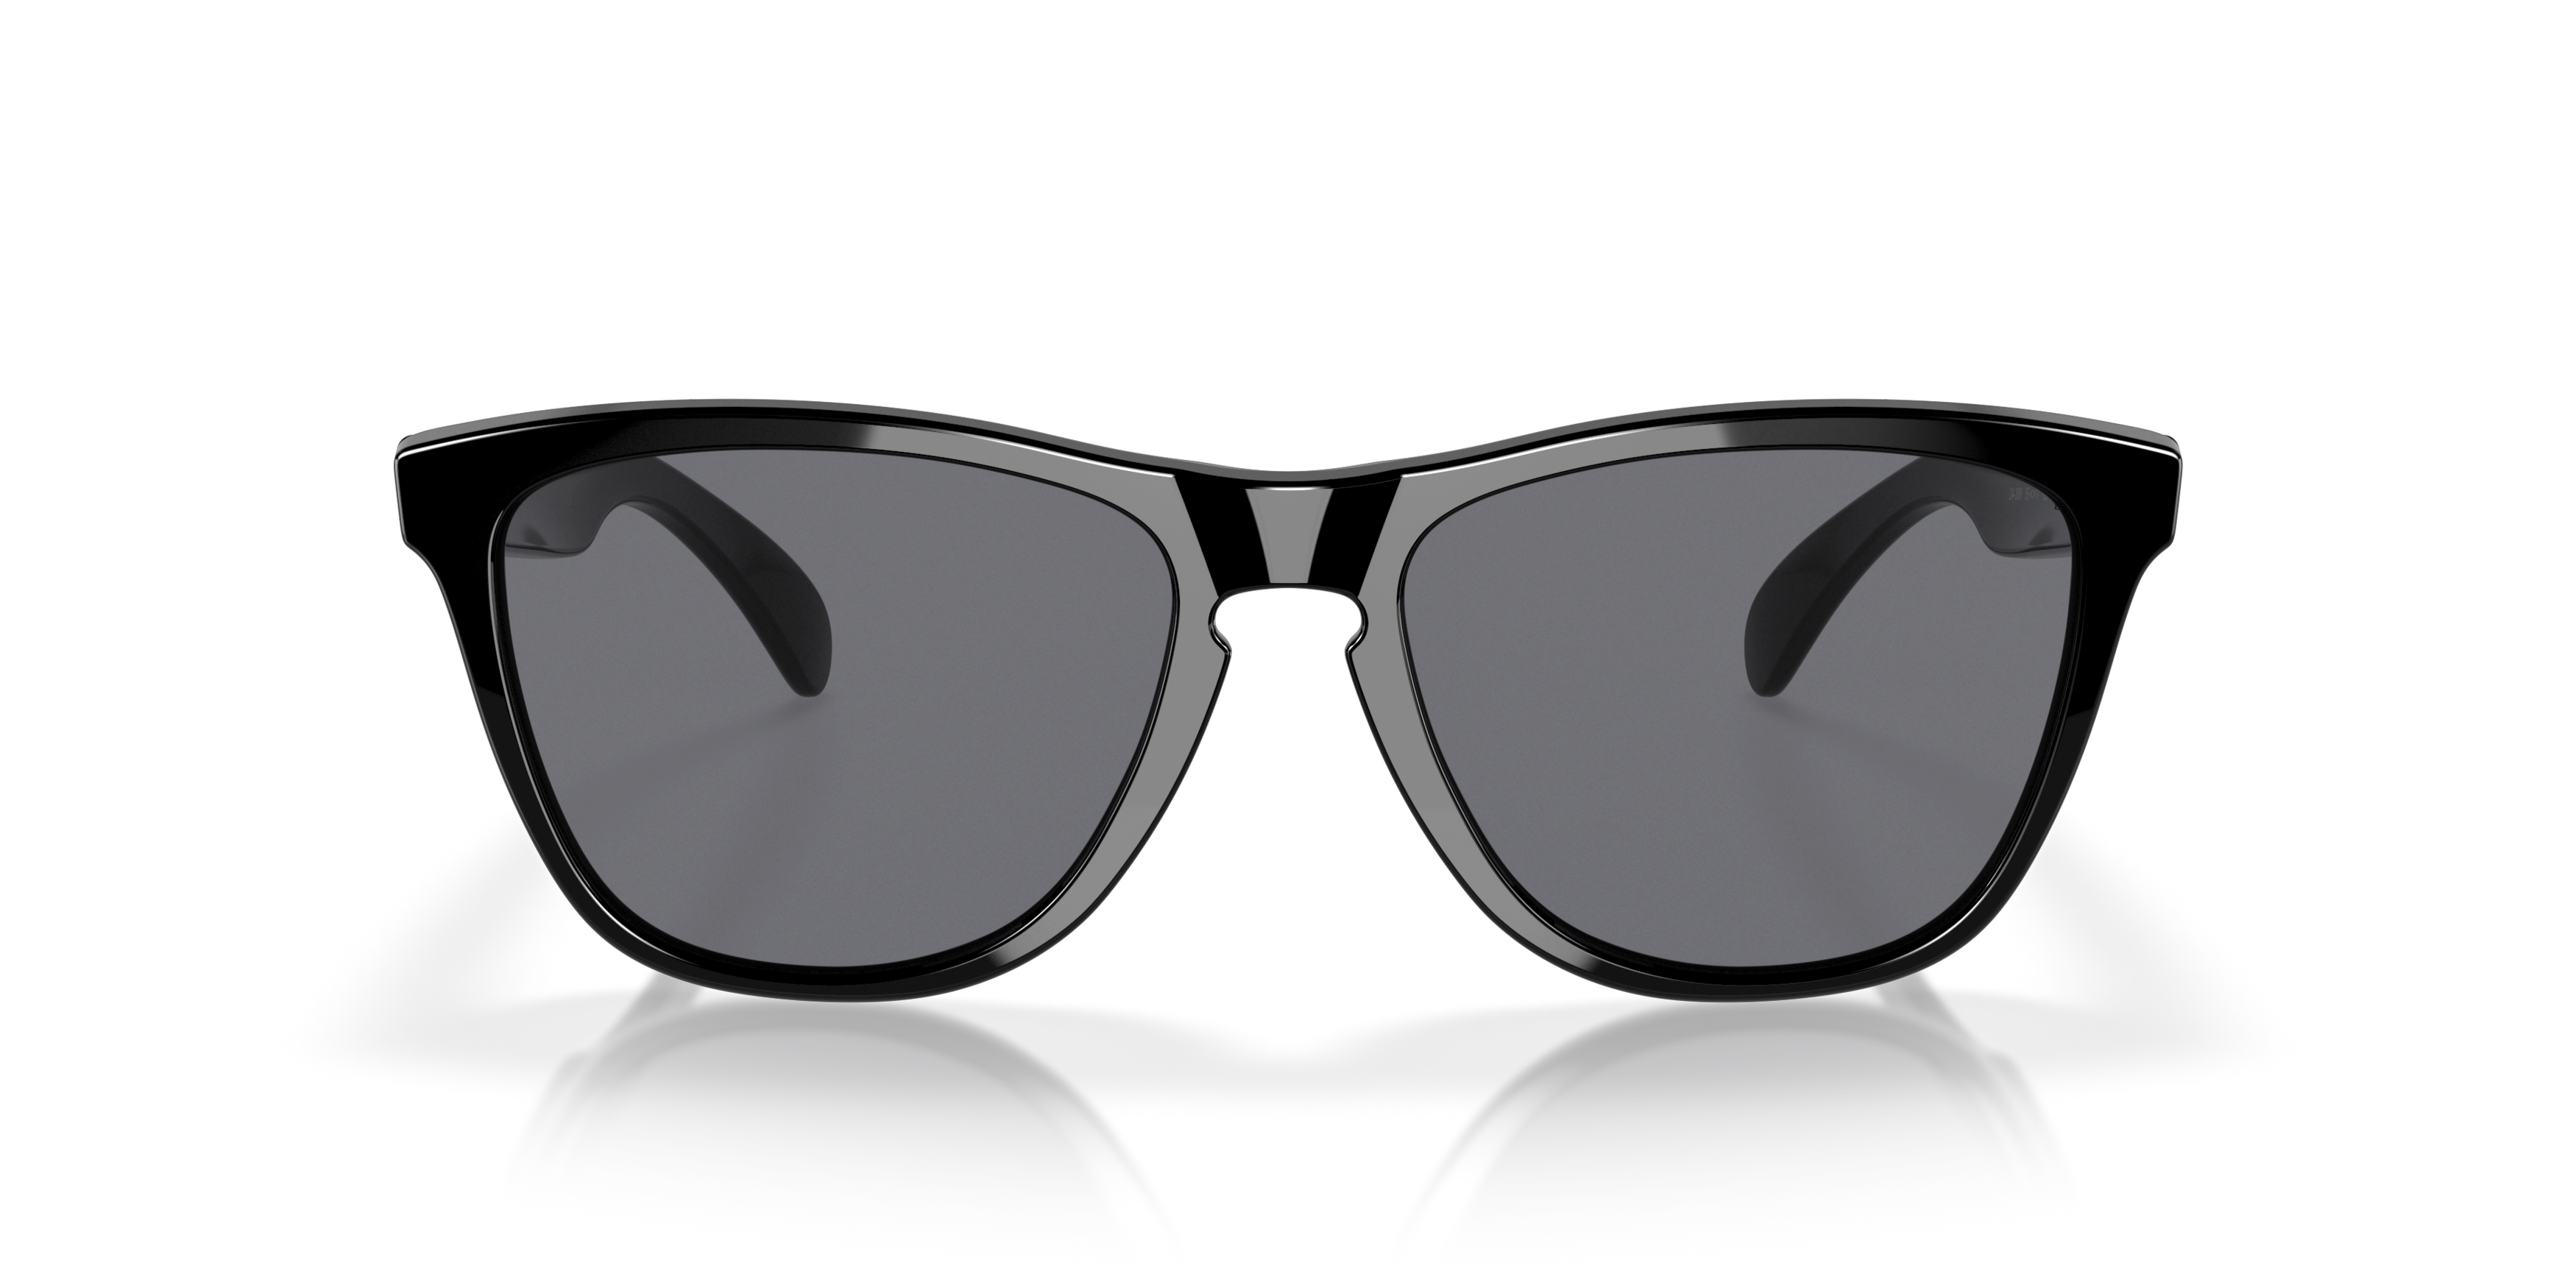 [products.image.front] Oakley FROGSKINS OO9013 24-306